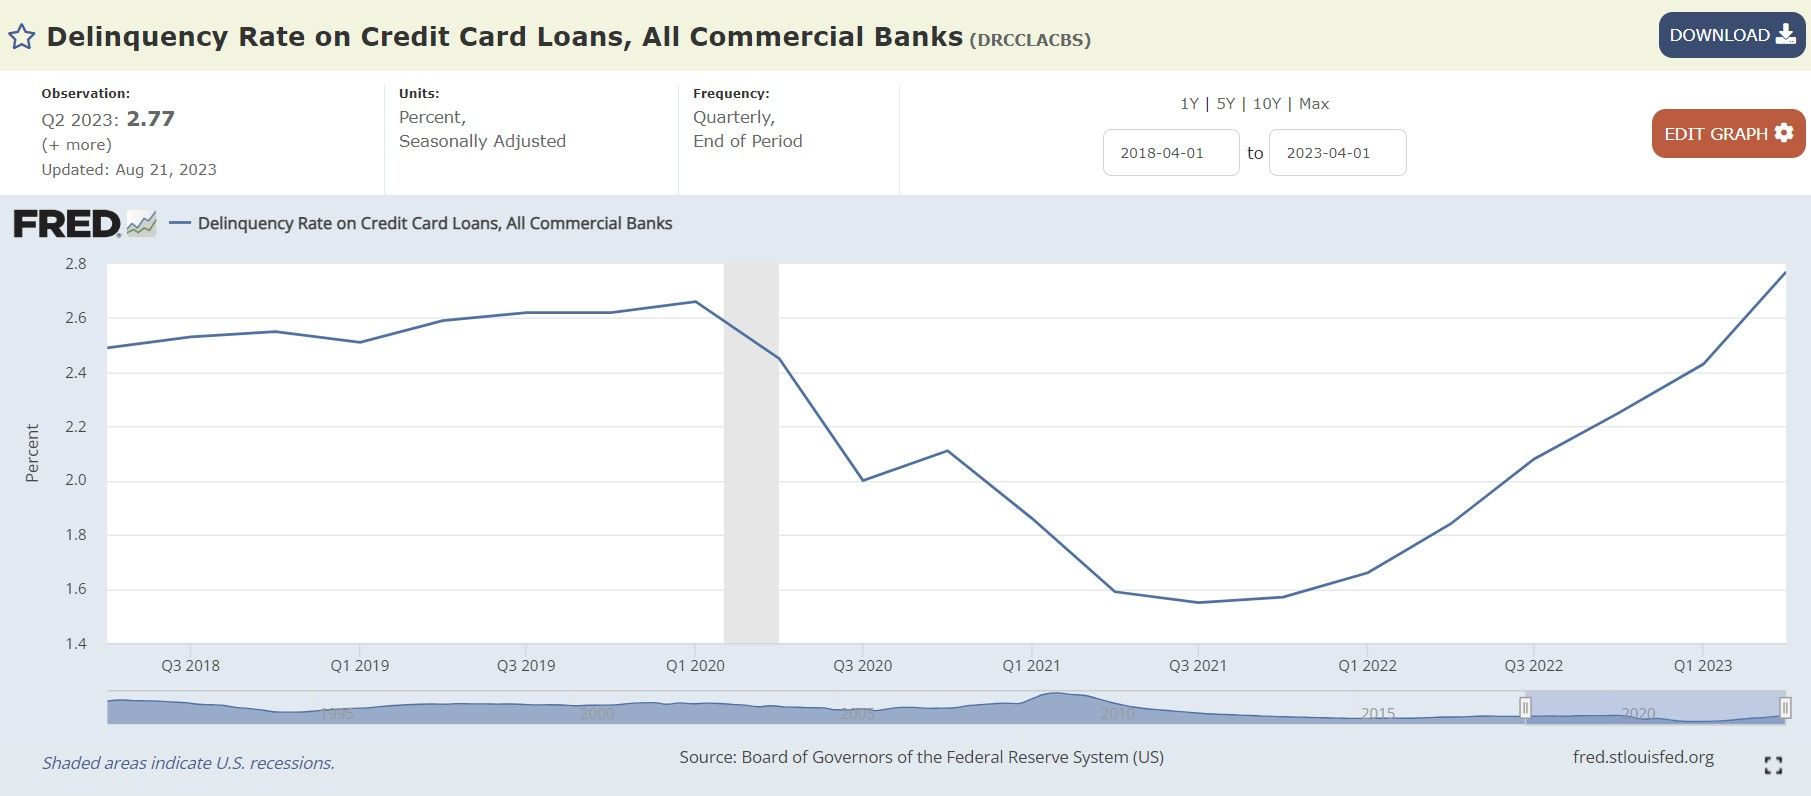 Delinquency Rate on Credit Card Loans, All Commercial Banks